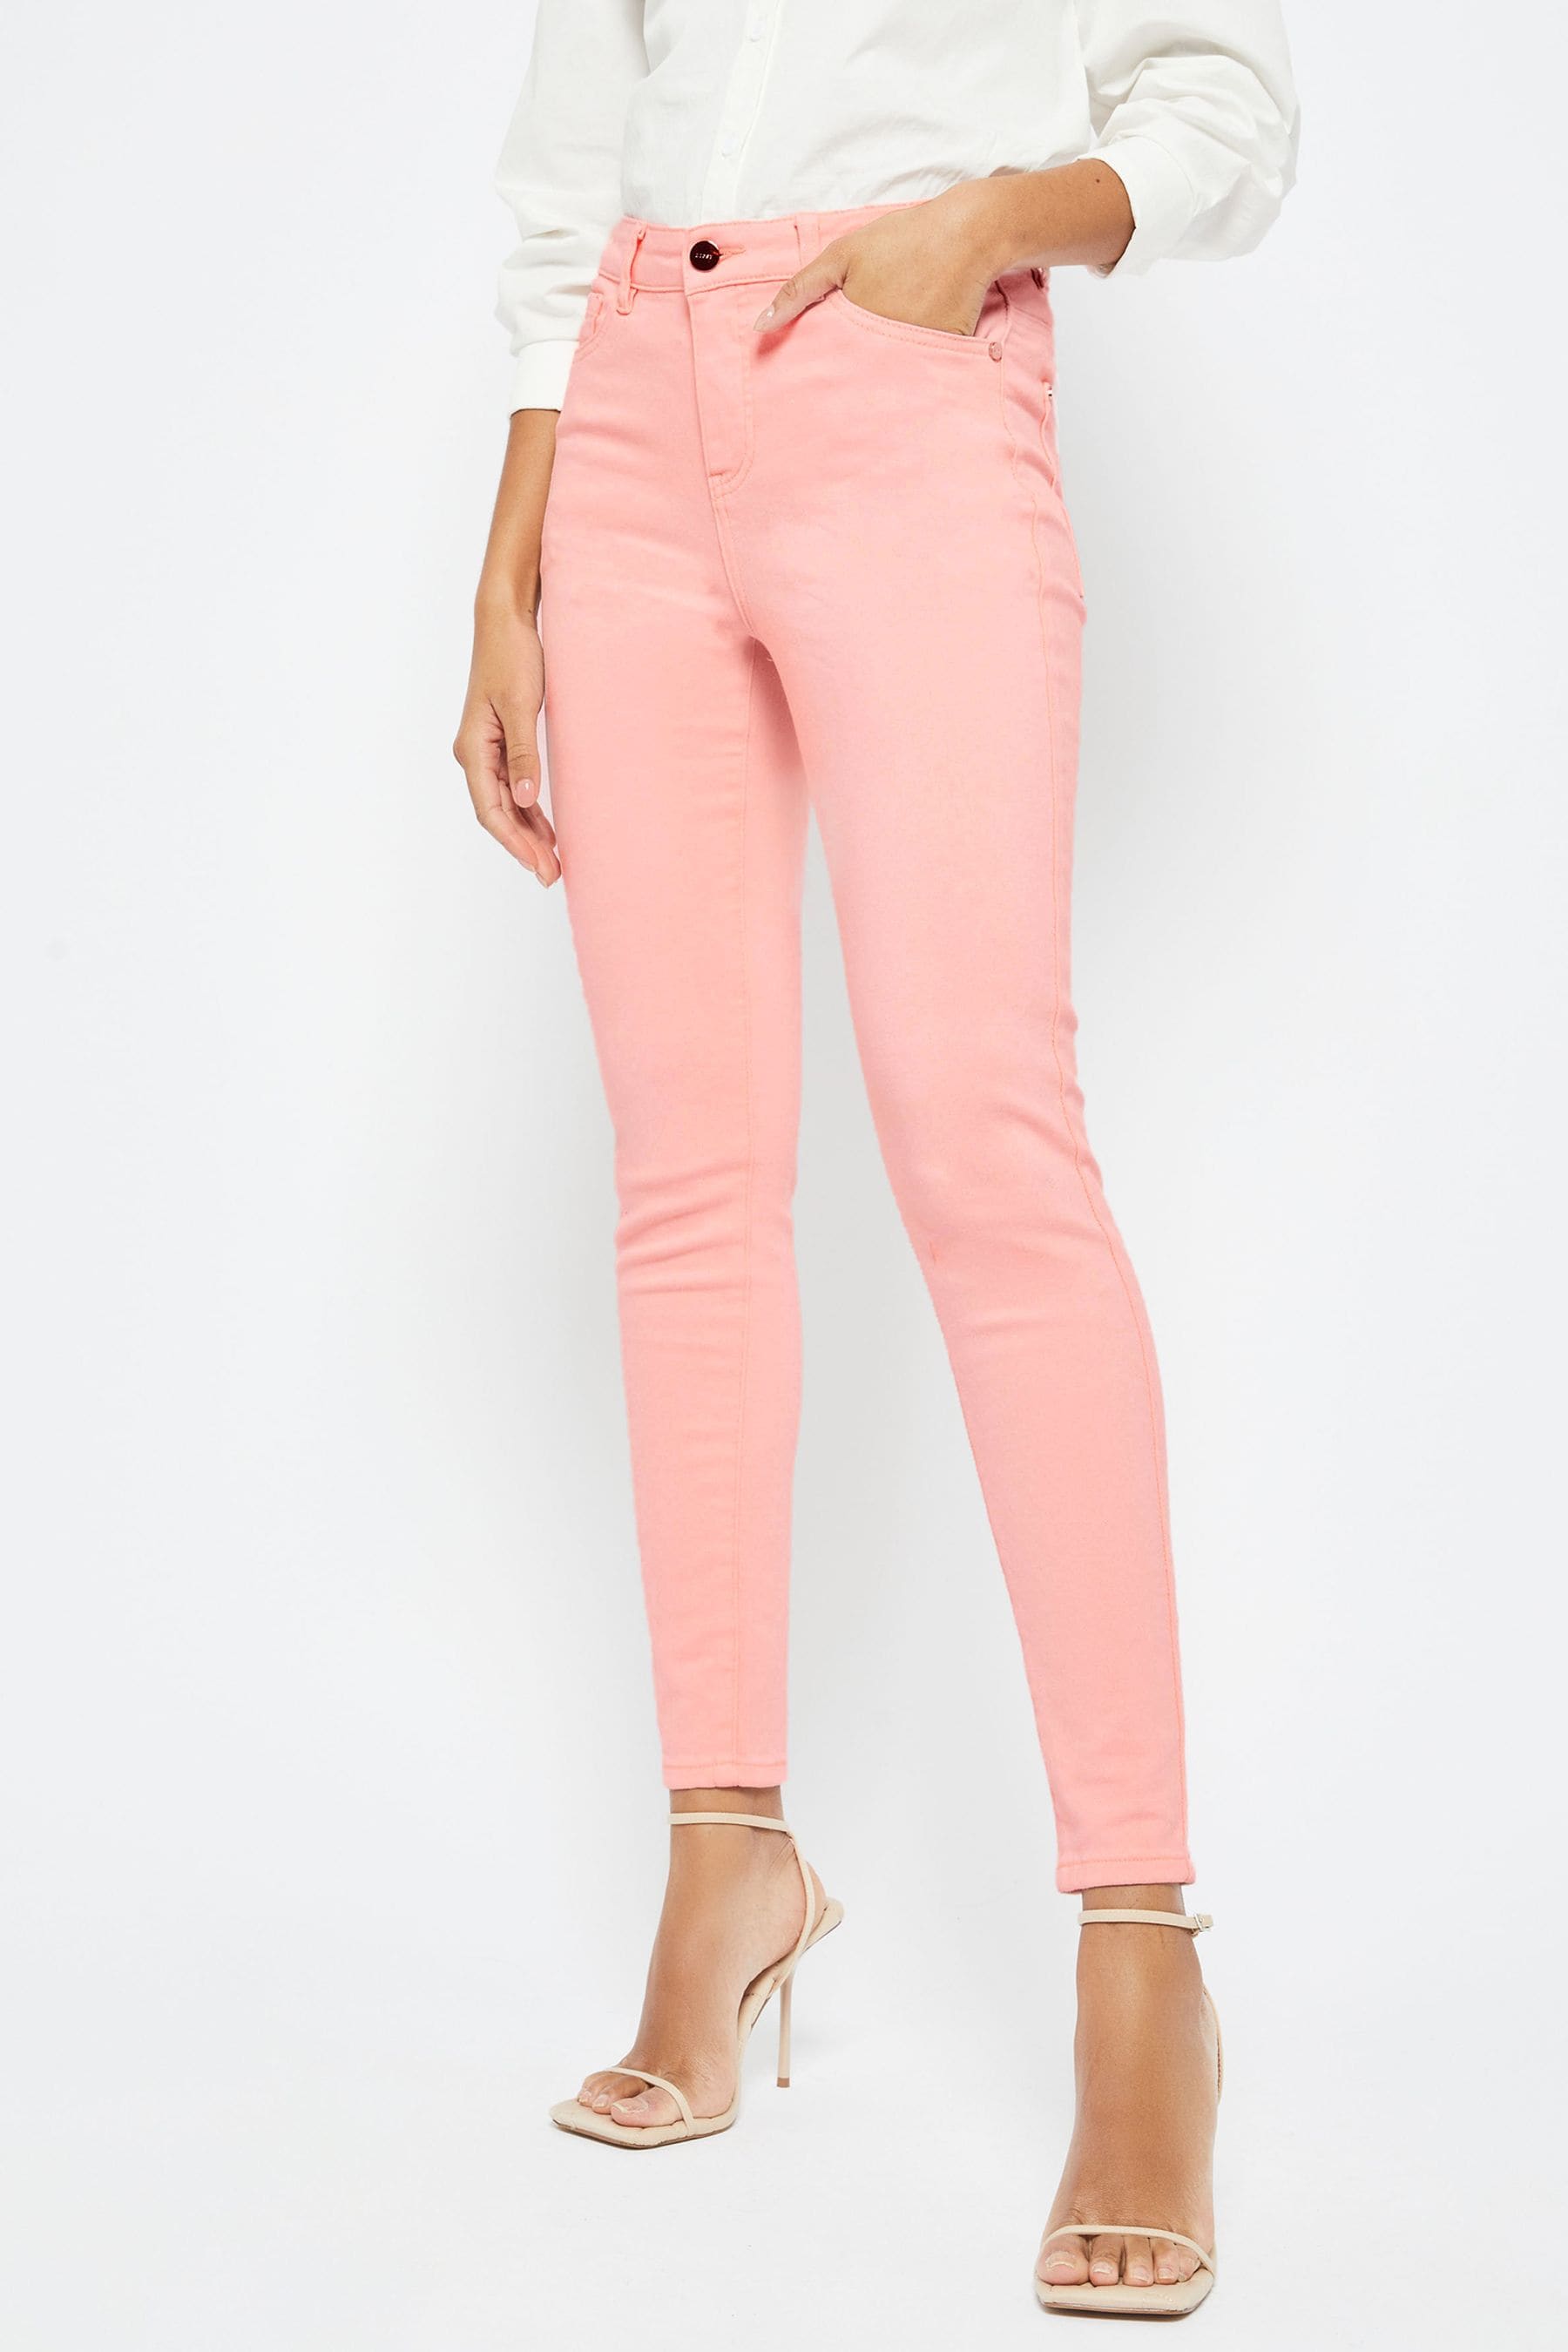 Buy Lipsy Mid Rise Skinny Kate Jeans from Next Ireland